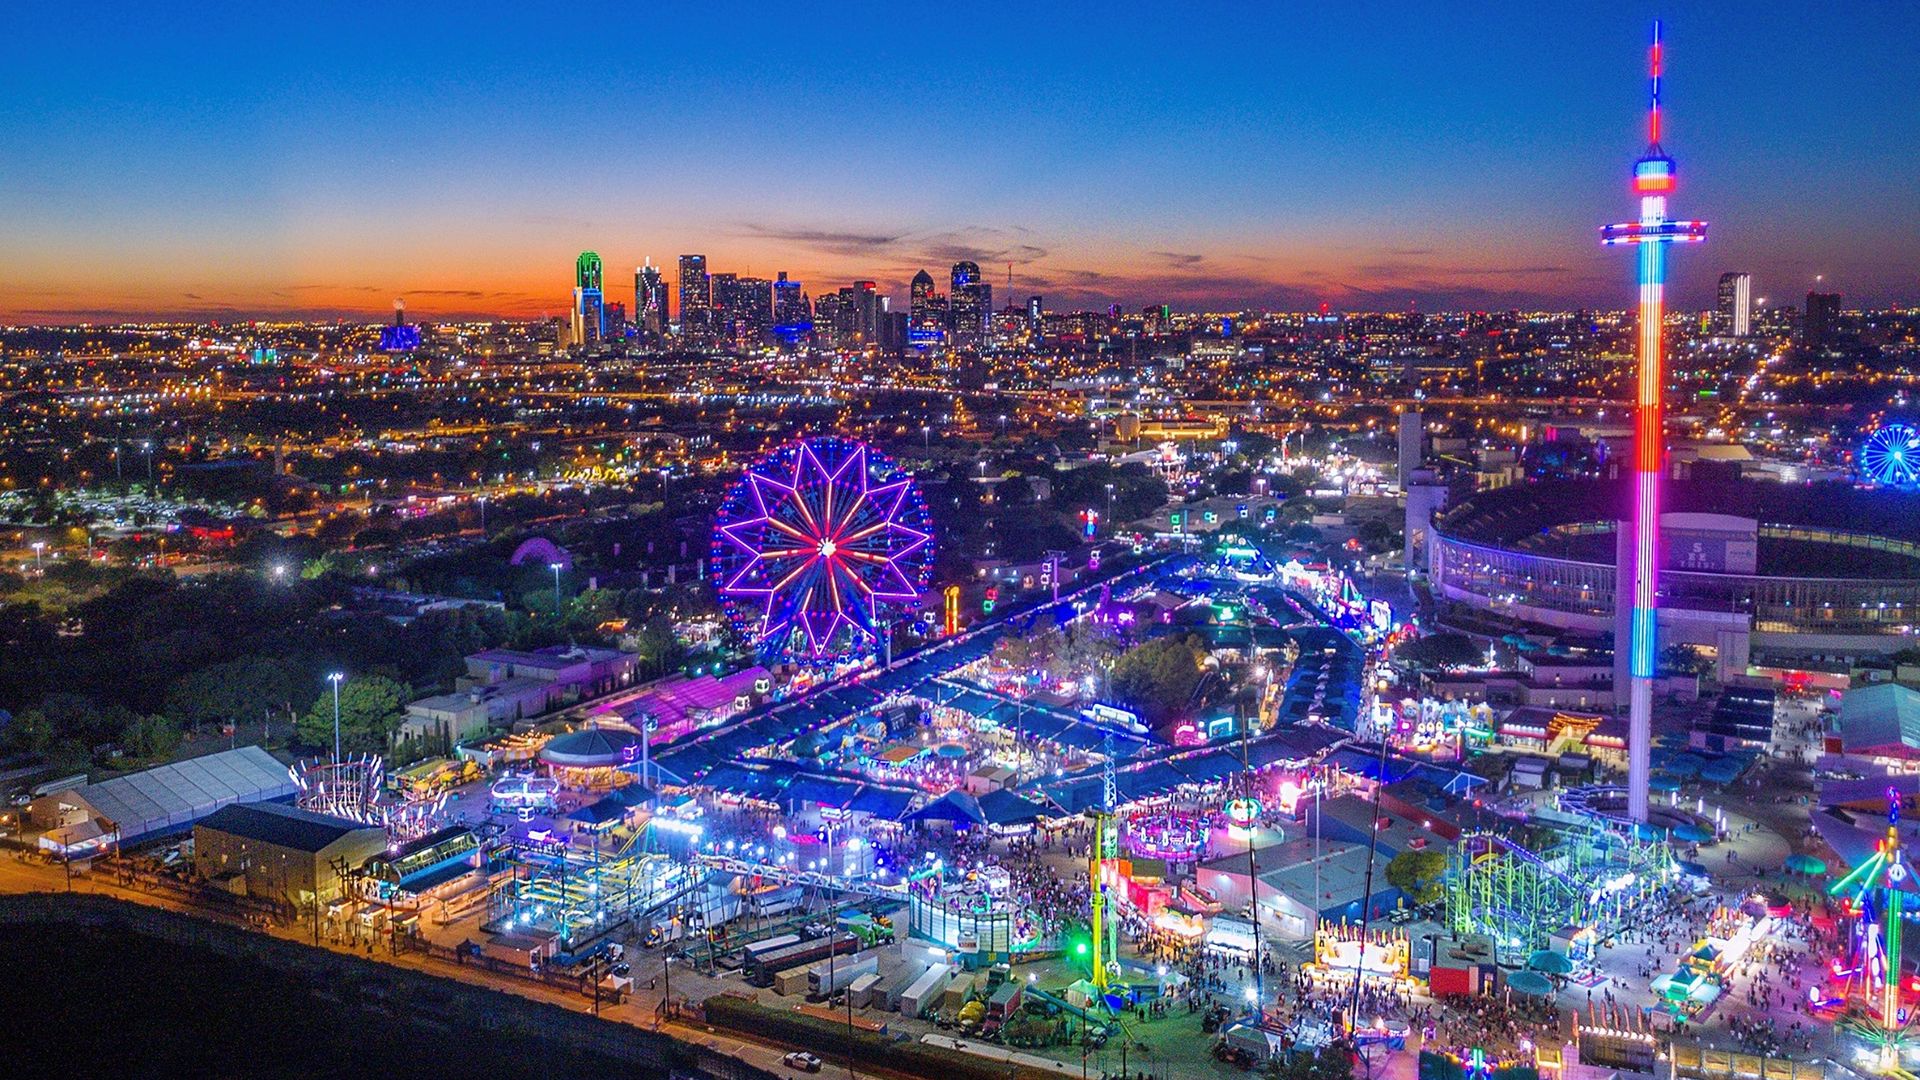 The bright lights of the State Fair of Texas at night.